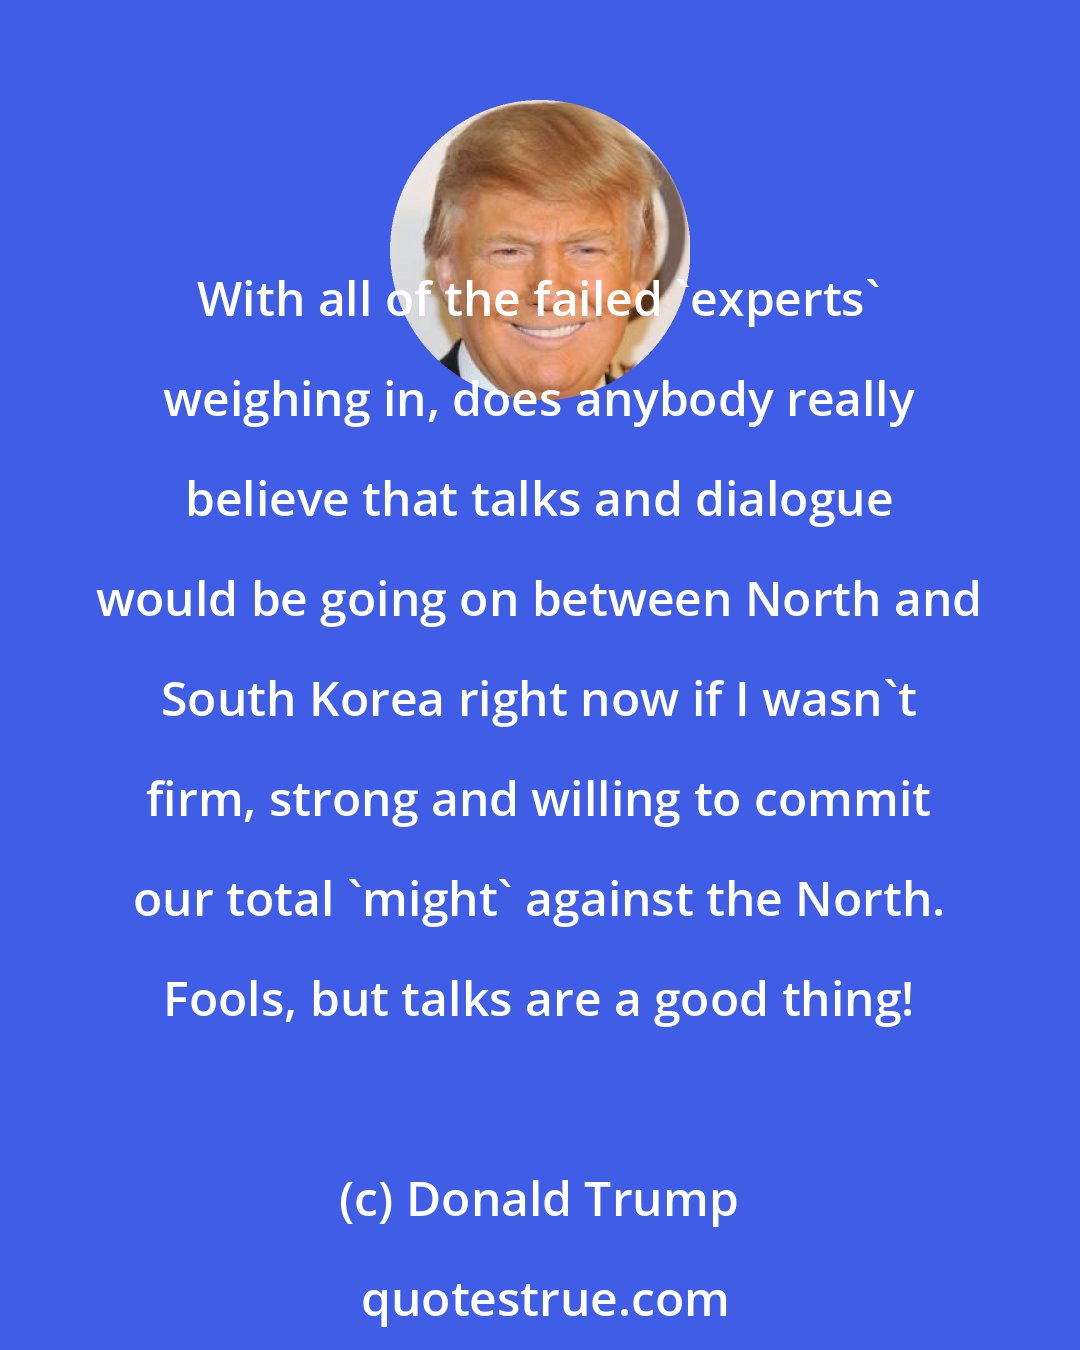 Donald Trump: With all of the failed 'experts' weighing in, does anybody really believe that talks and dialogue would be going on between North and South Korea right now if I wasn't firm, strong and willing to commit our total 'might' against the North. Fools, but talks are a good thing!